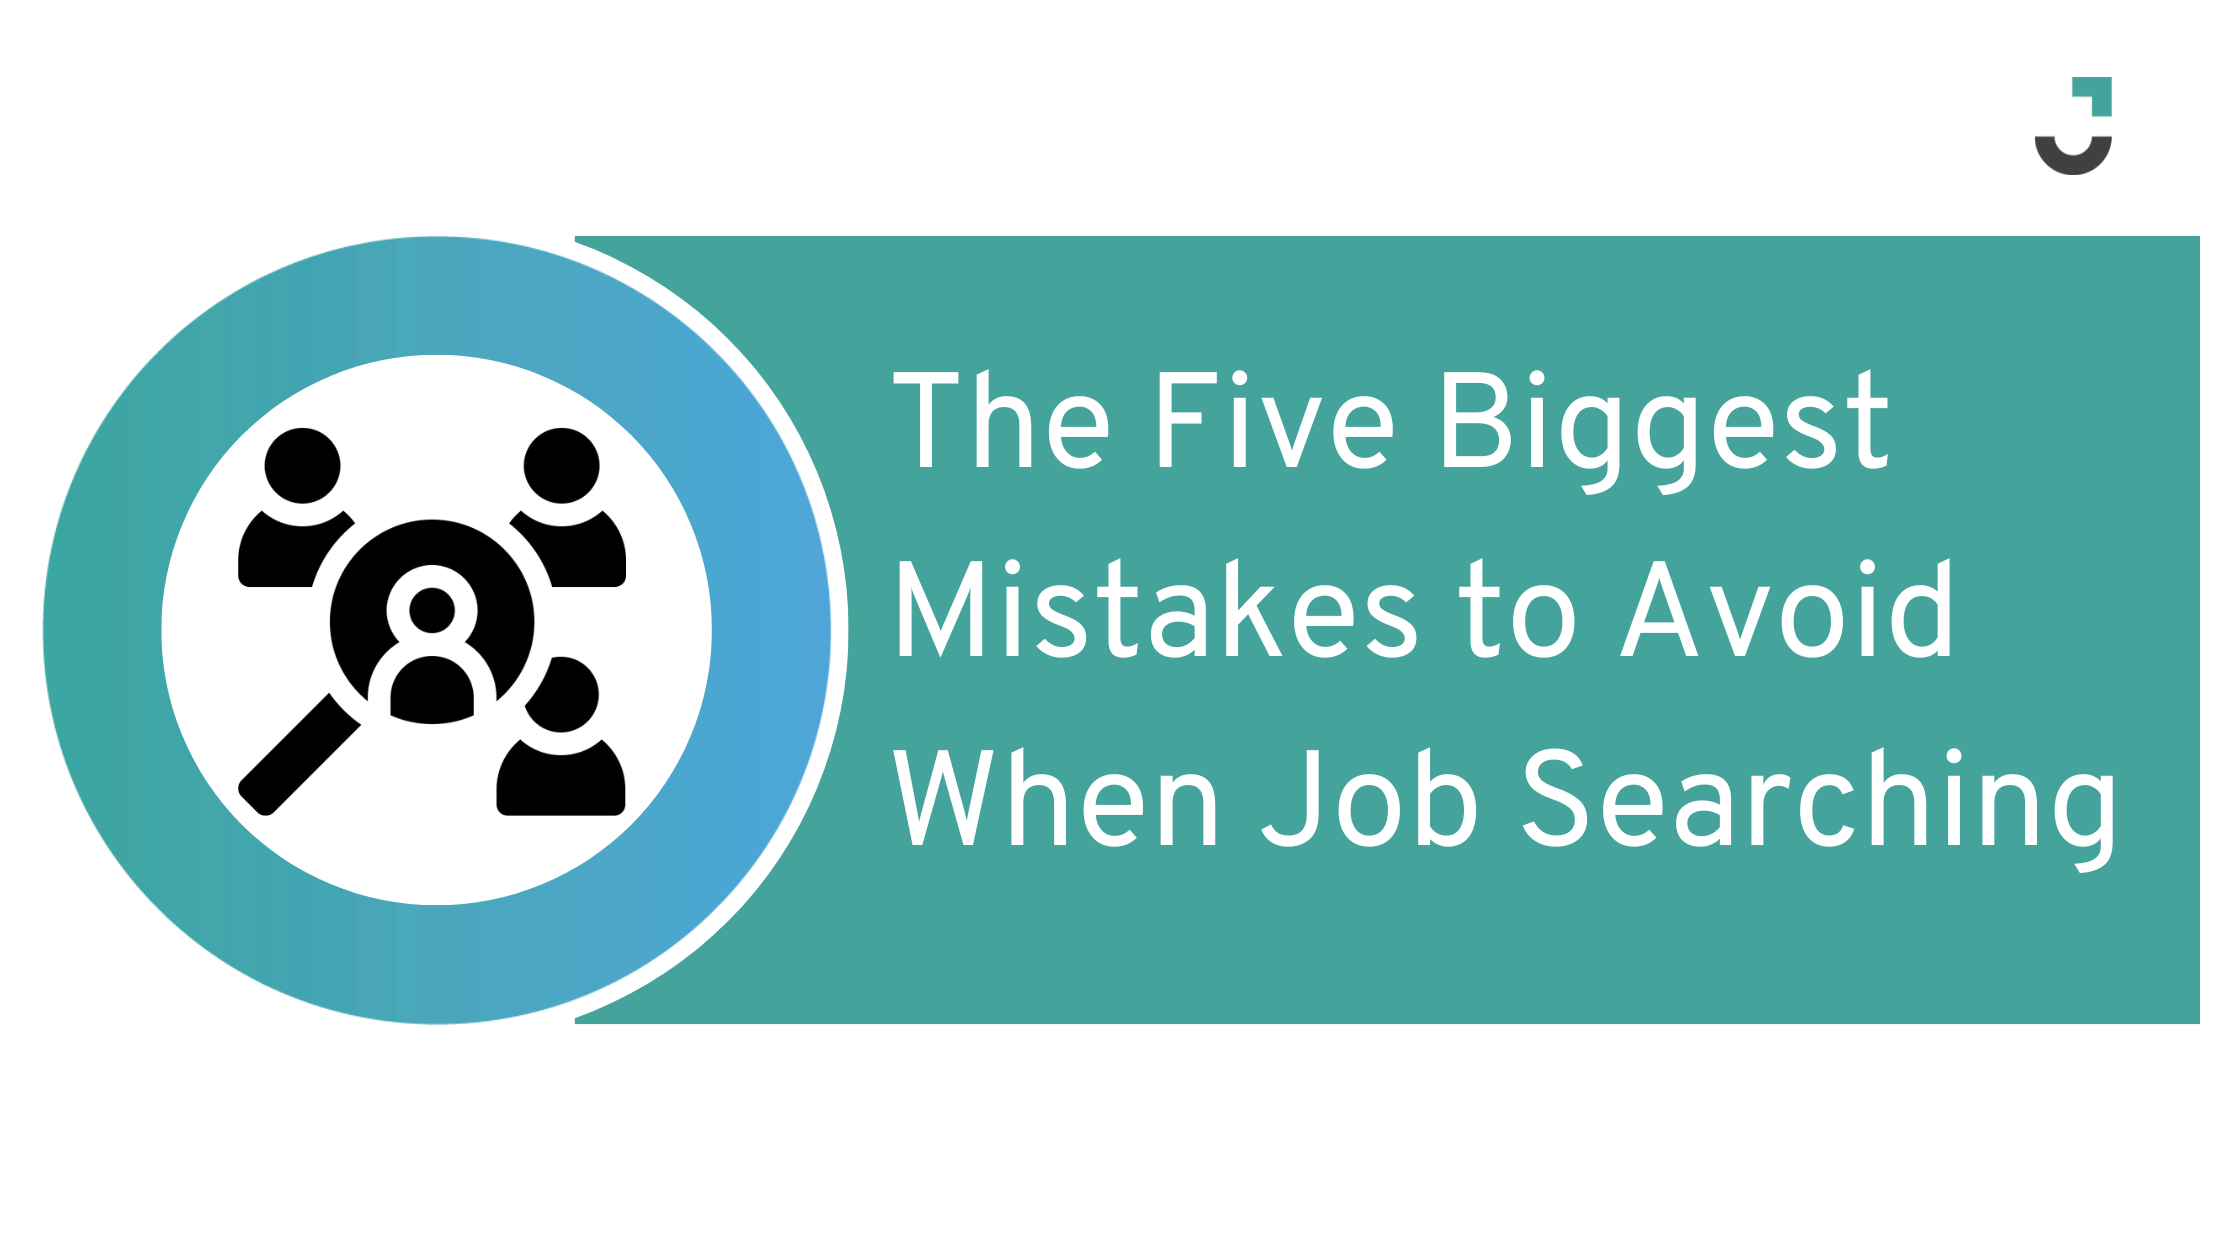 The Five Biggest Mistakes to Avoid When Job Searching